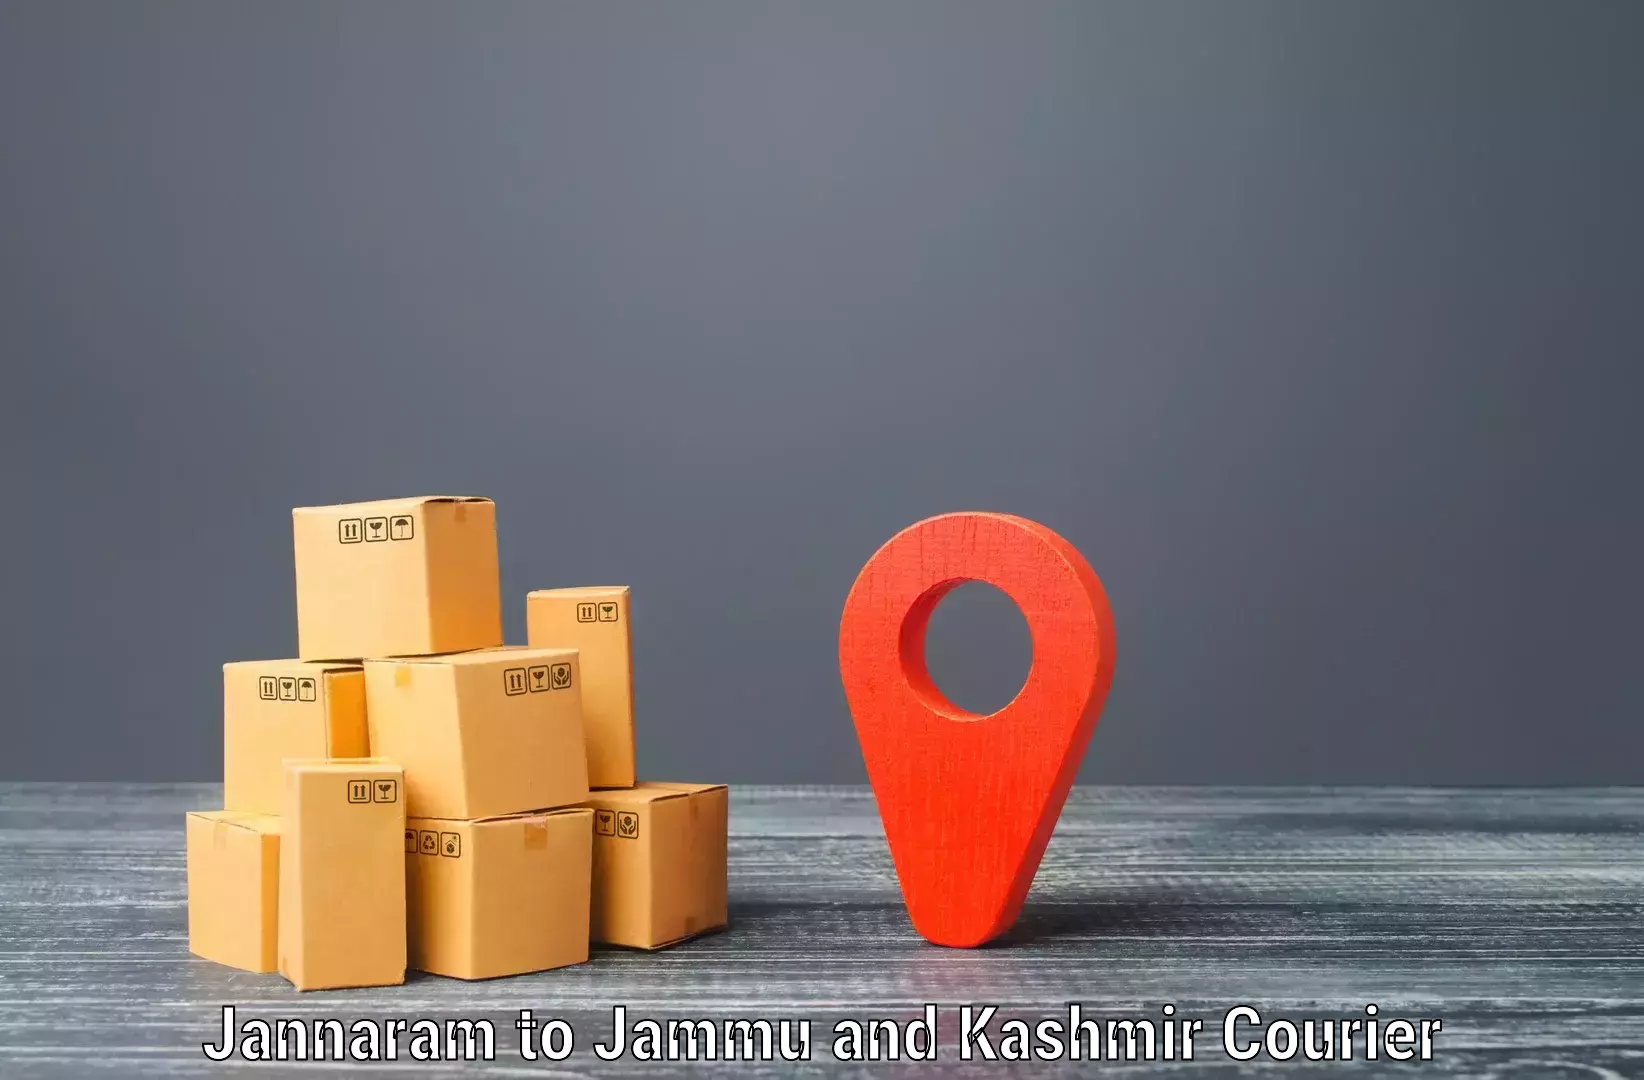 Express delivery capabilities Jannaram to Budgam